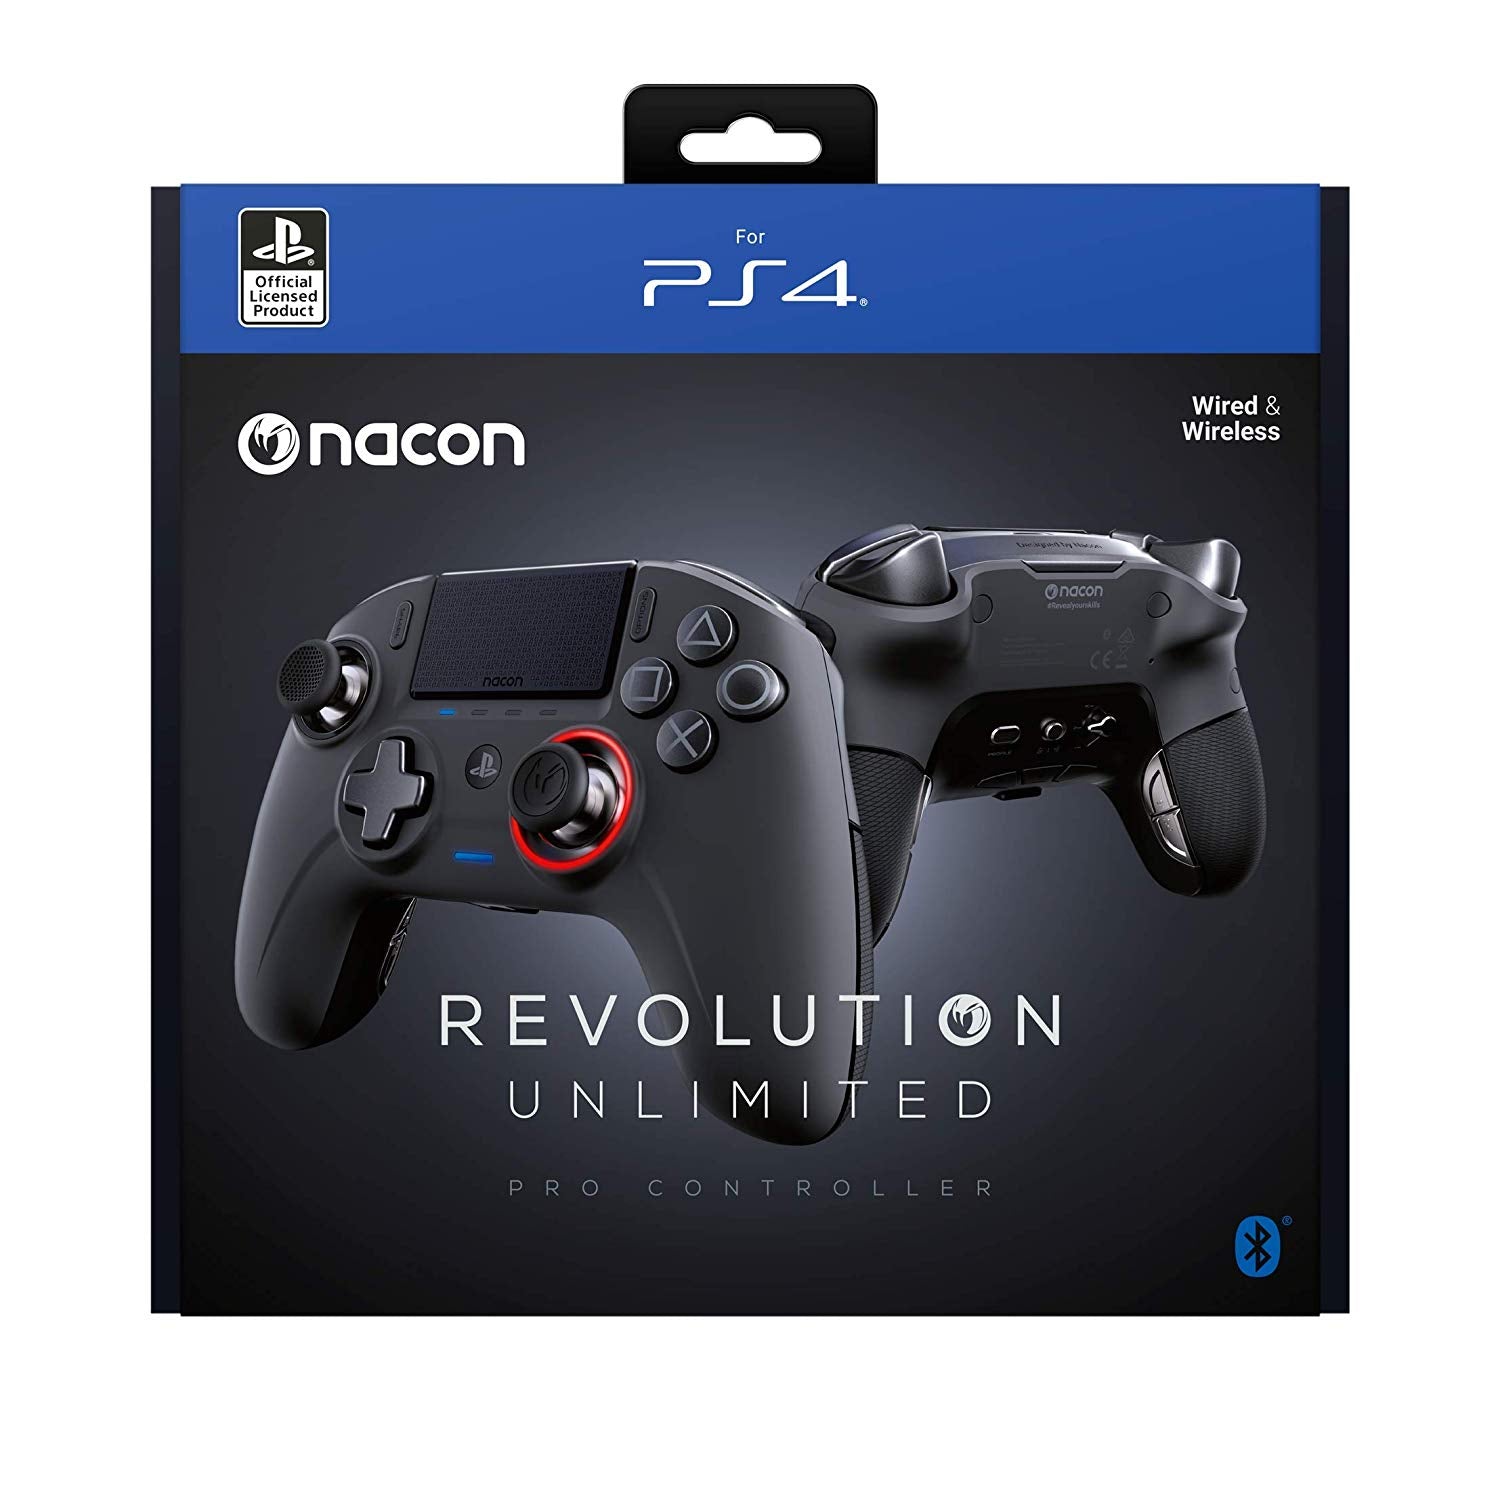 Unlimited Pro Controller